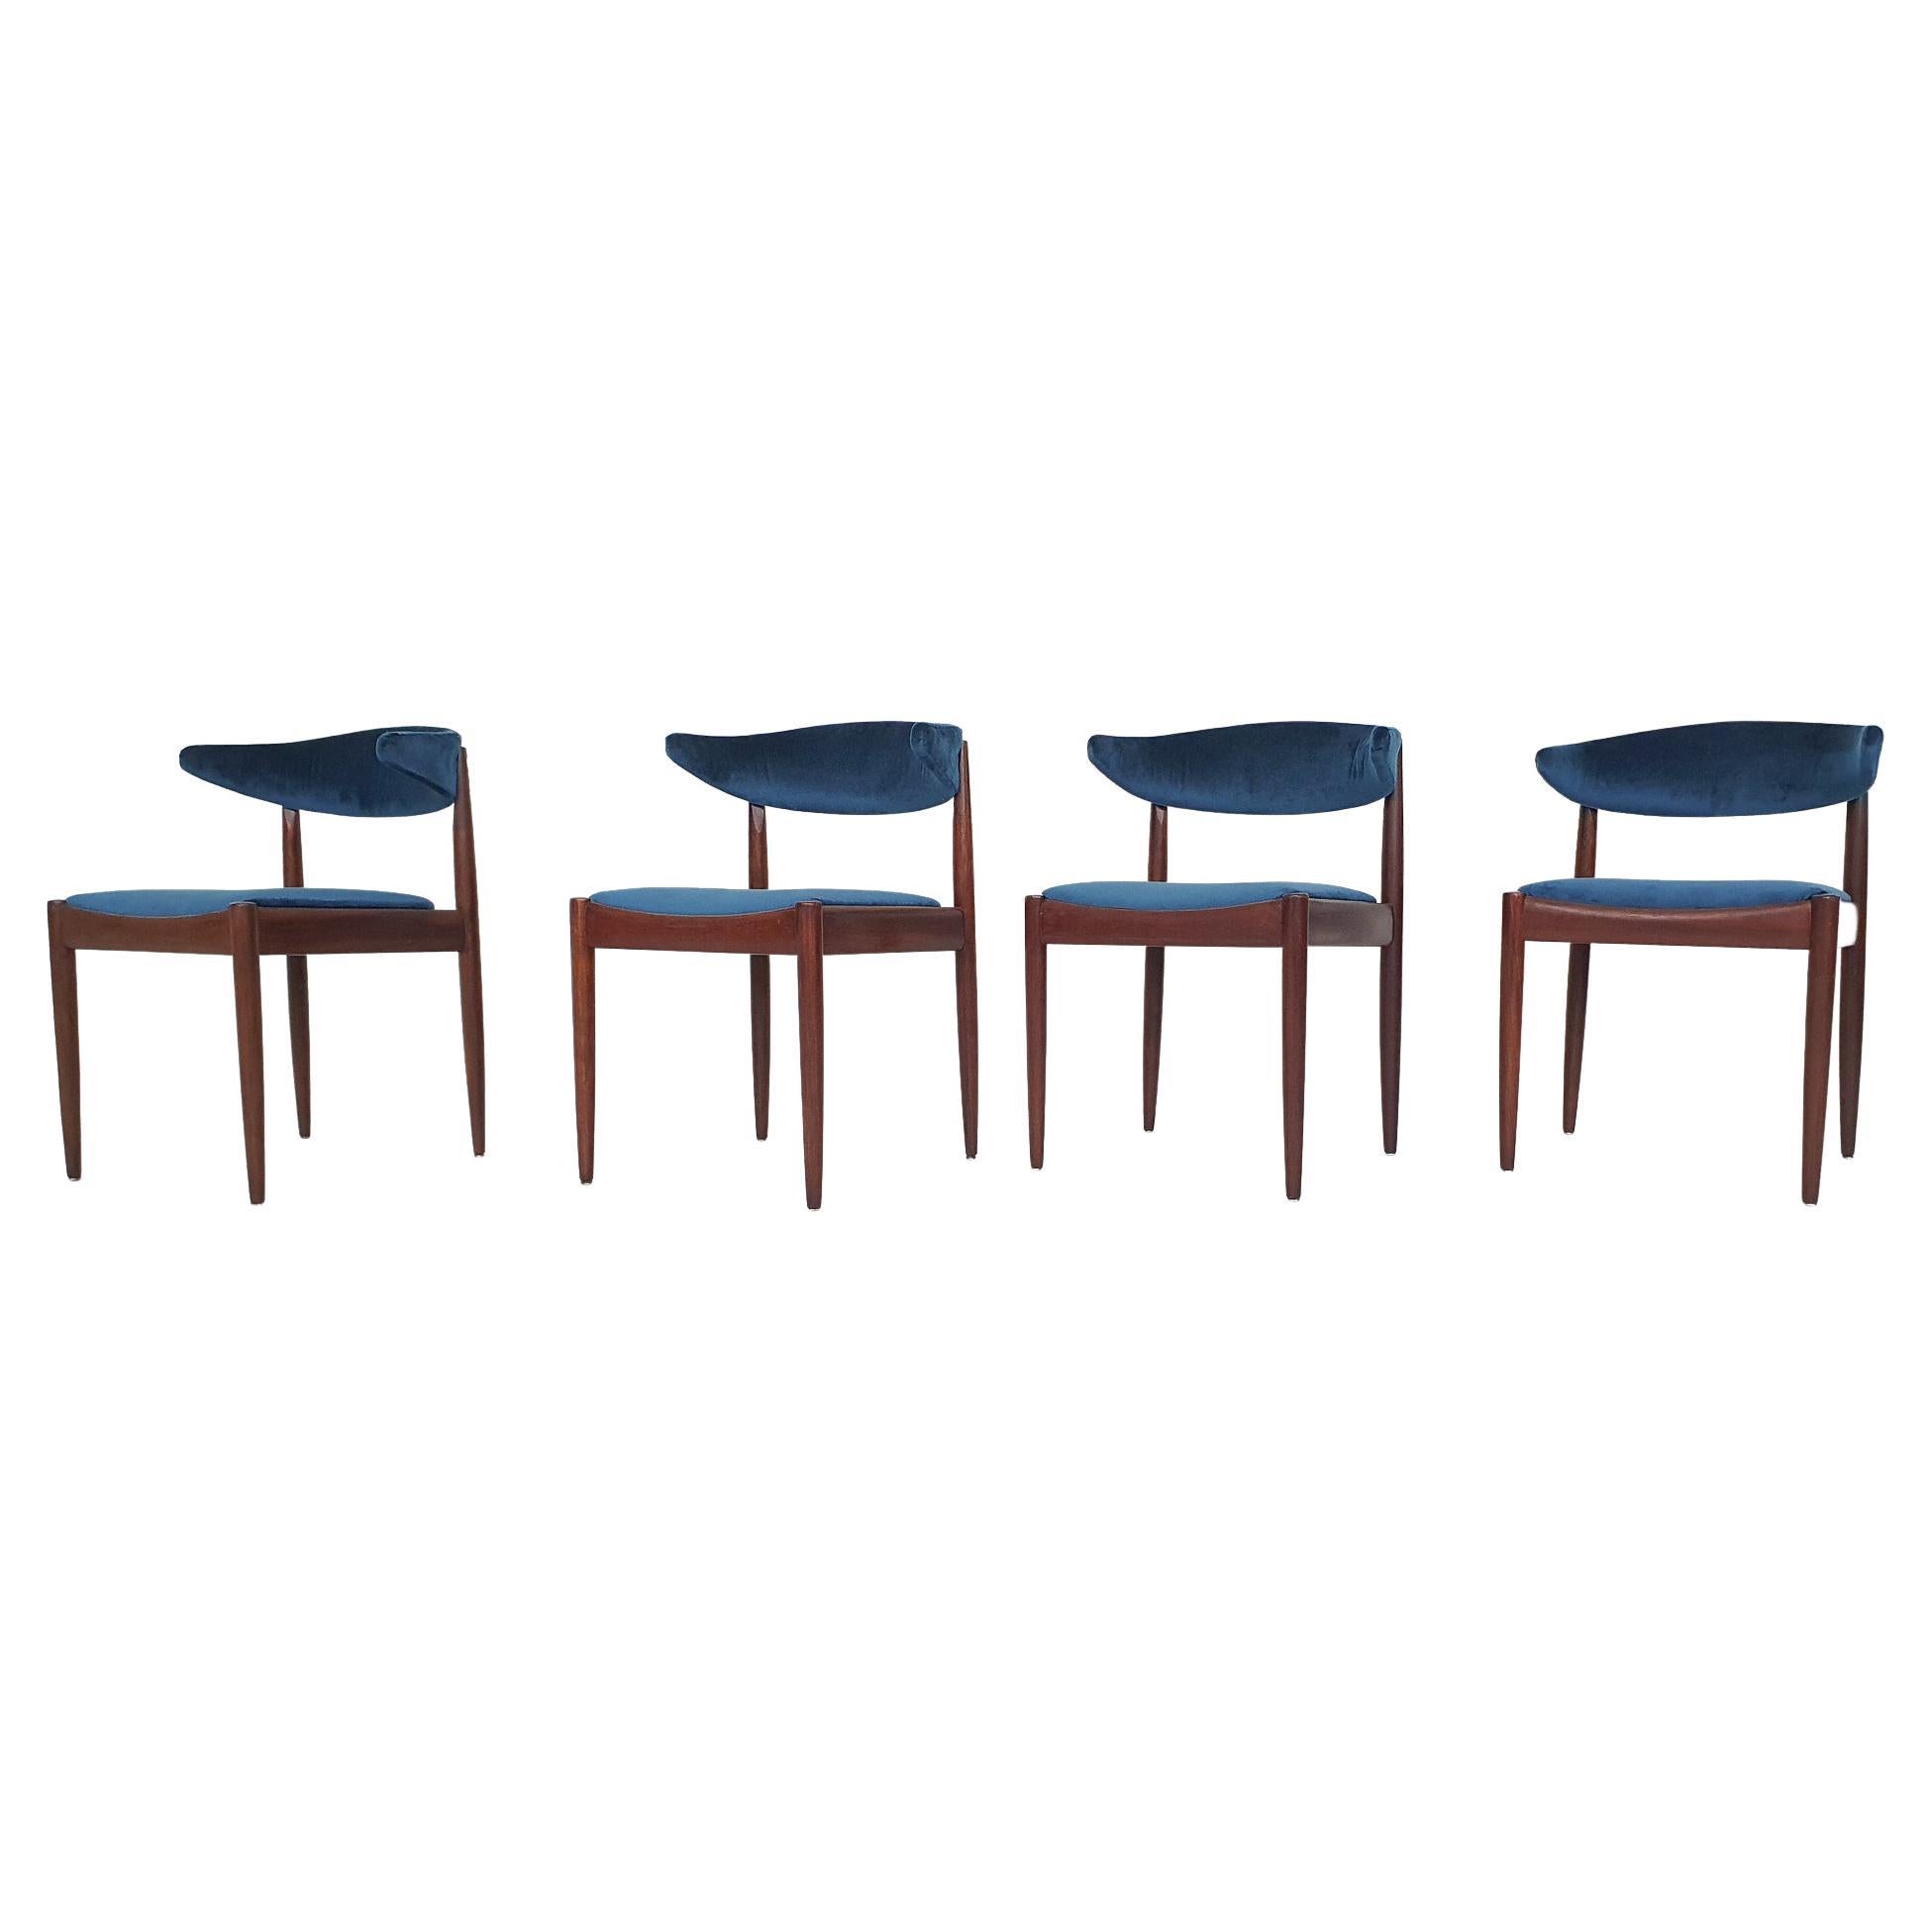 Set of Four Rosewood and Velvet Dining Chairs by Topform, the Netherlands 1950's For Sale